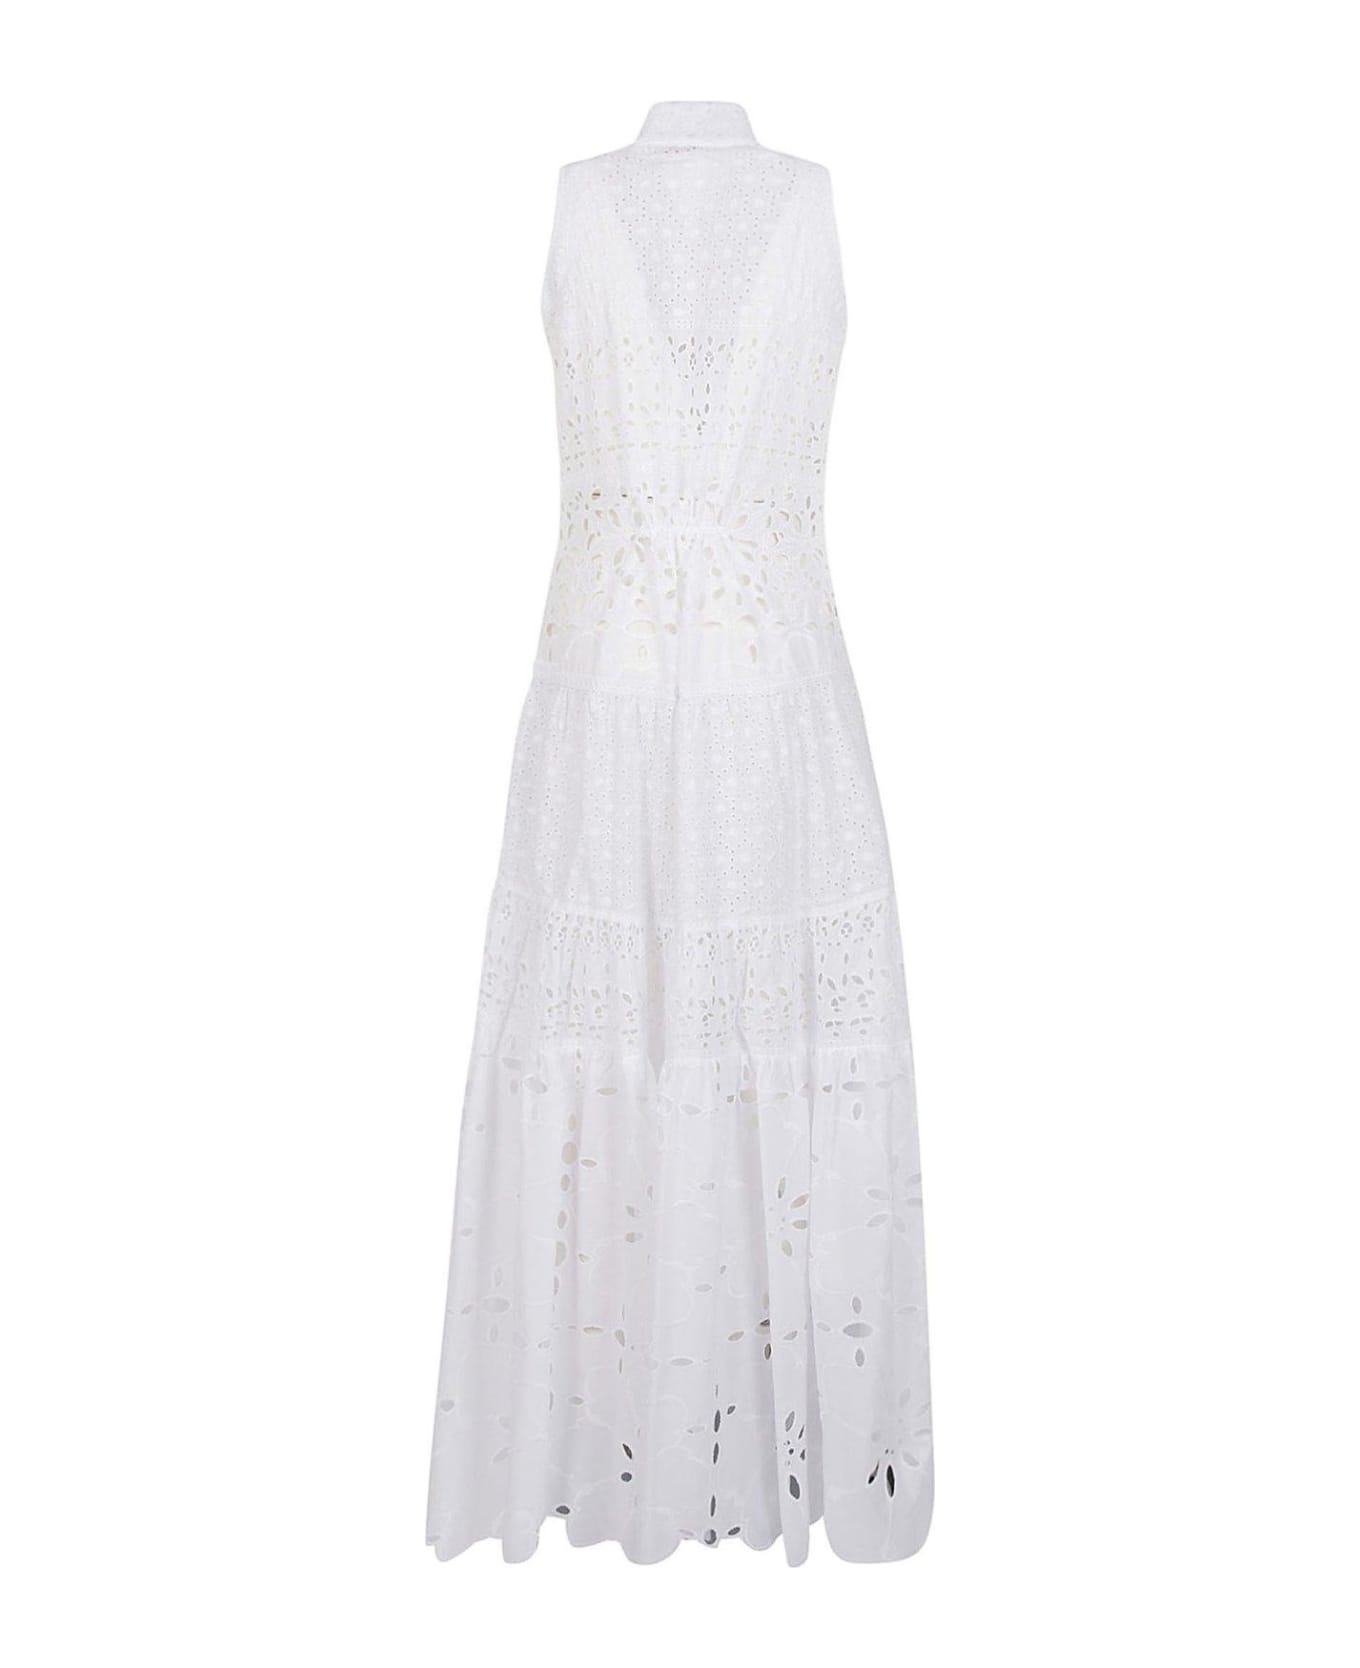 Ermanno Scervino Broderie Anglaise Long Shirtdress - Bright White